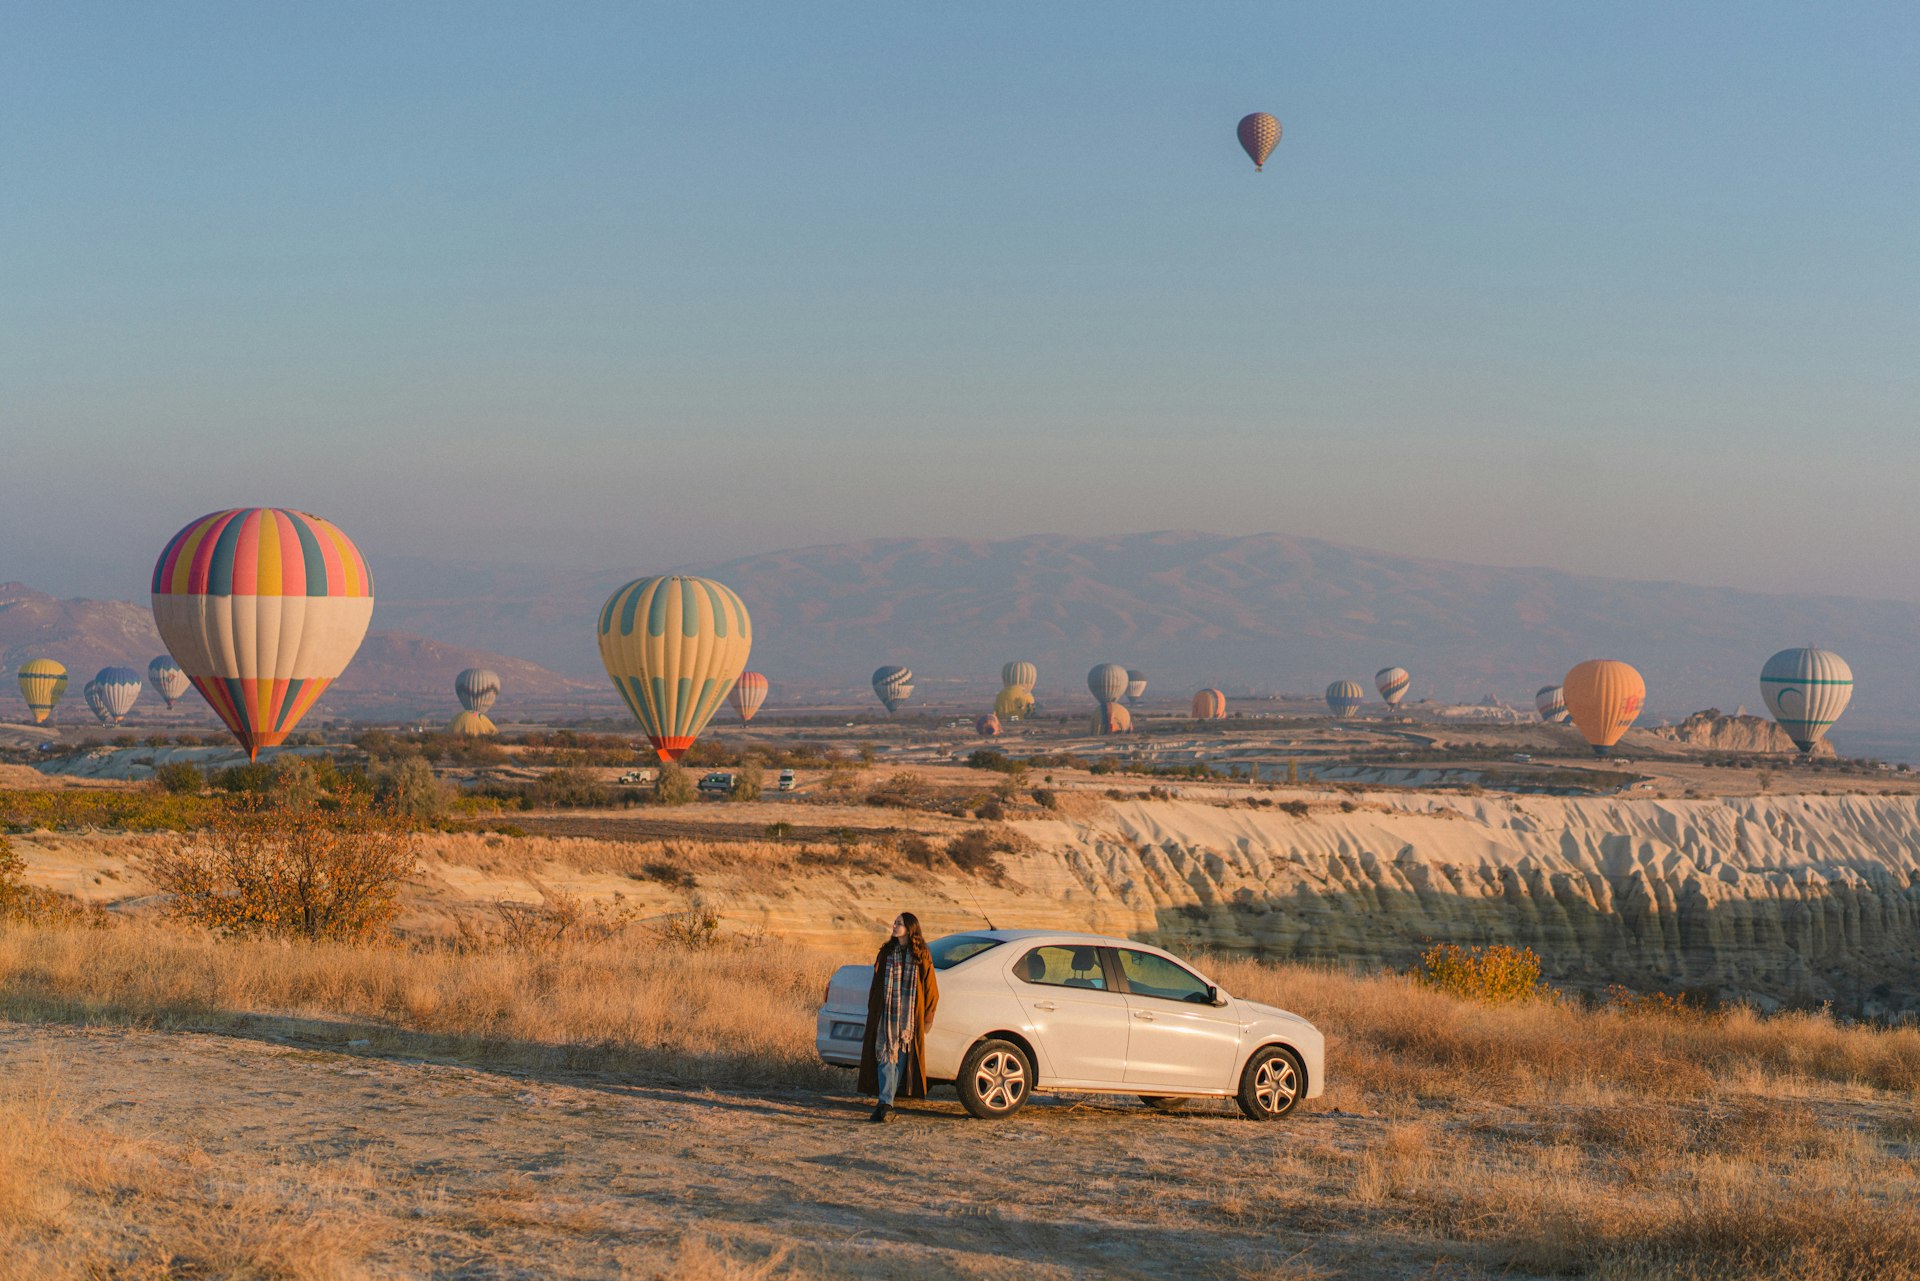 A woman sits against a white car parked in front of a field full of hot air balloons in Cappadocia